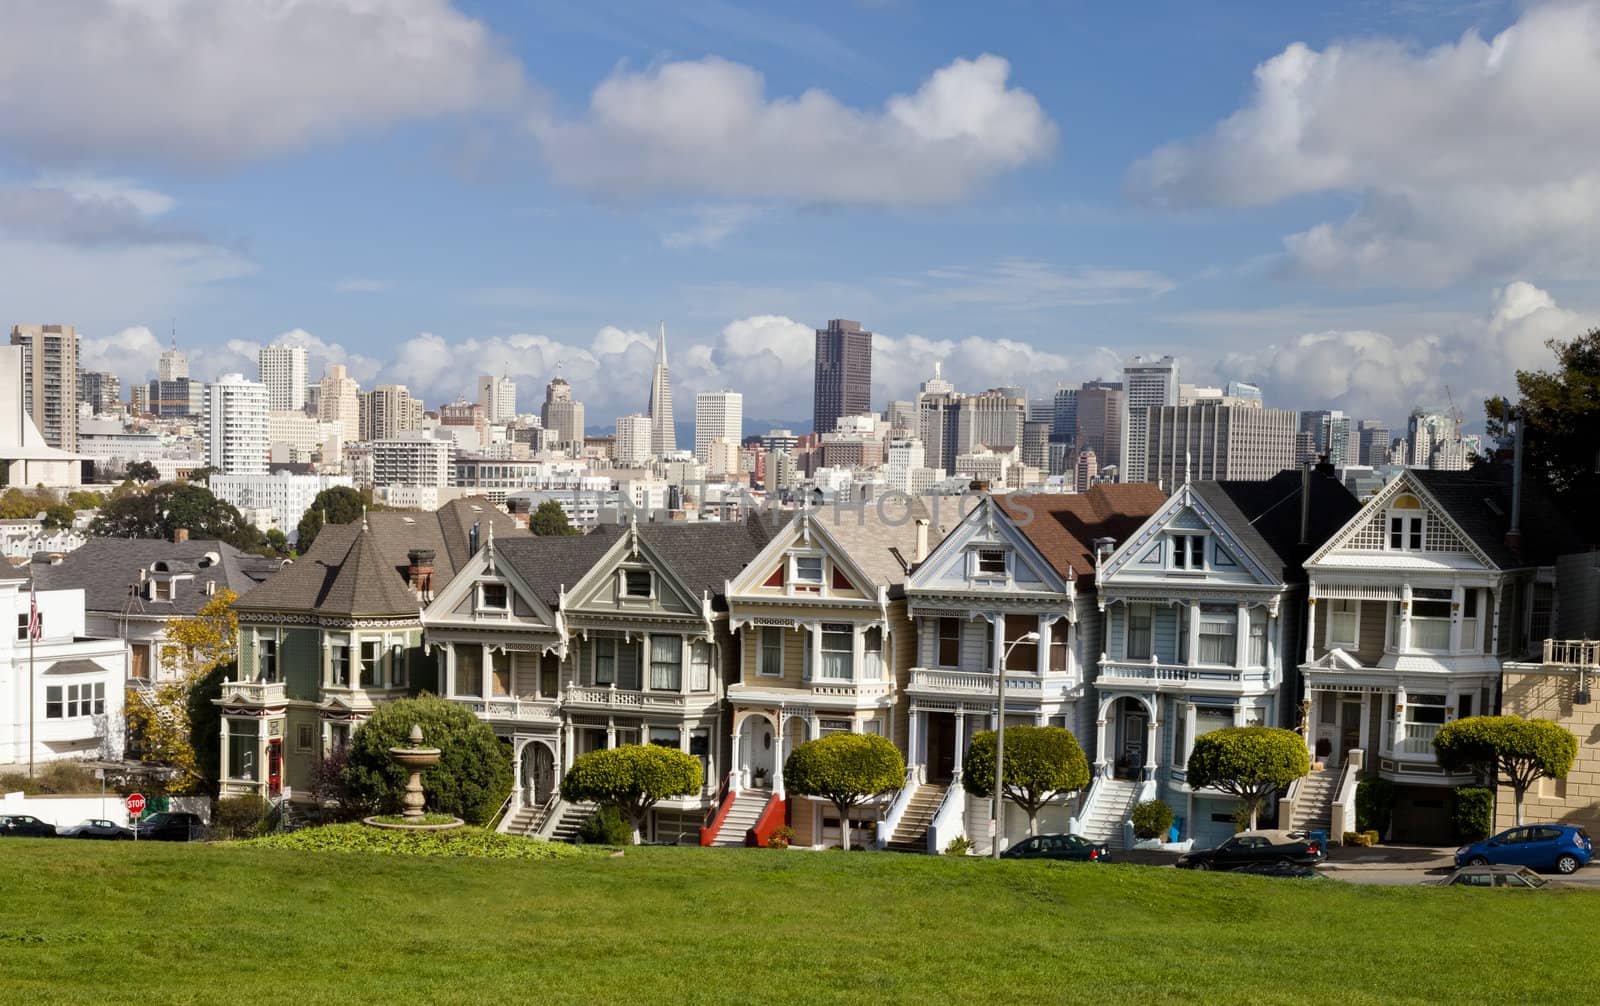 Painted Ladies with San Francisco skyline in the background as seen from Alamo Square.